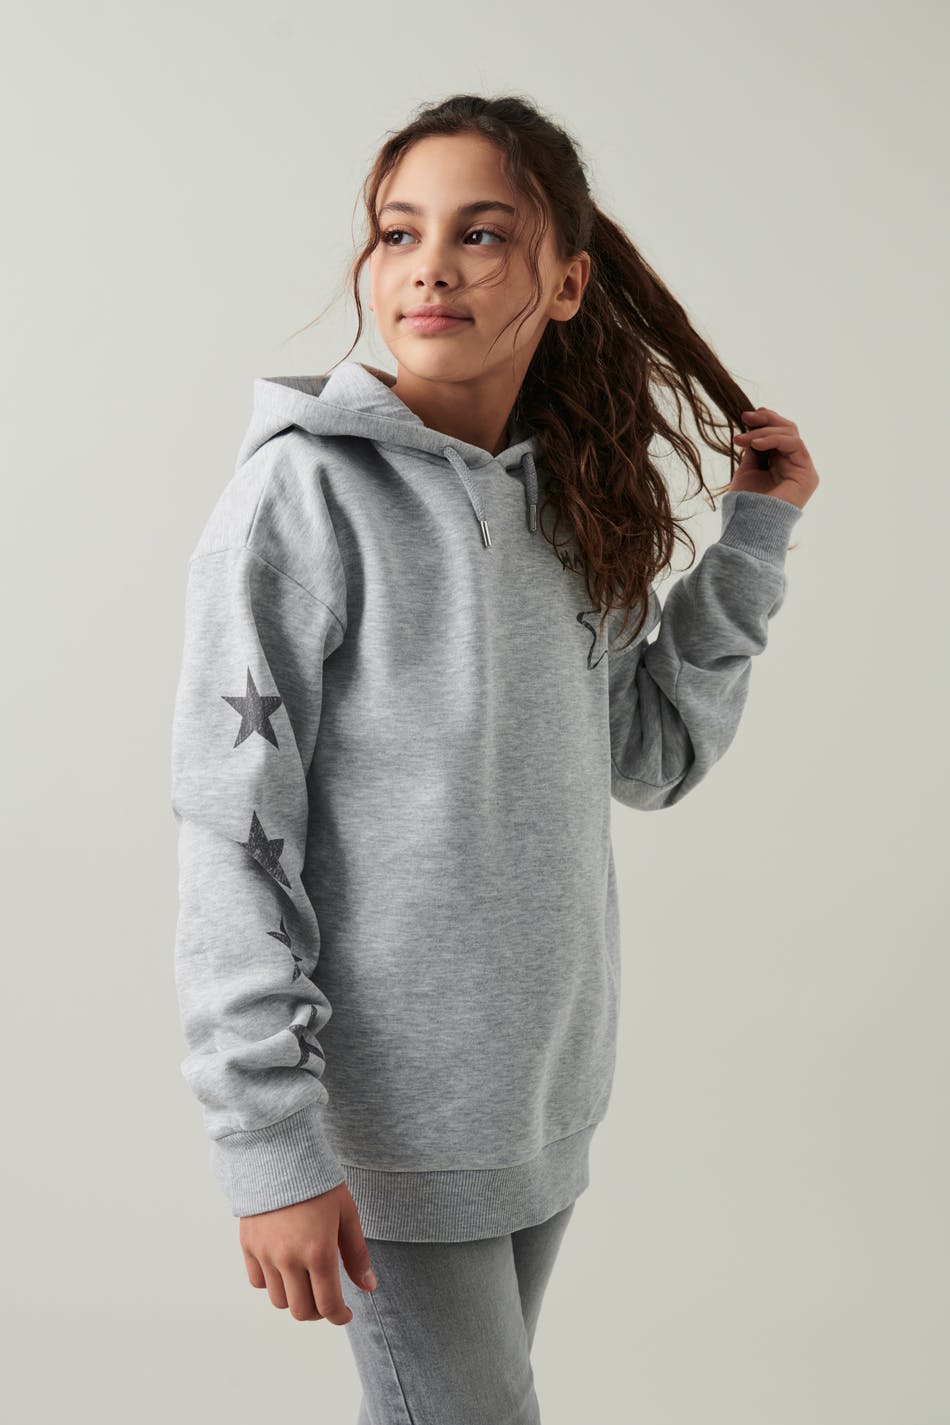 Gina Tricot - Y basic hood - young-tops - Grey - 146/152 - Female